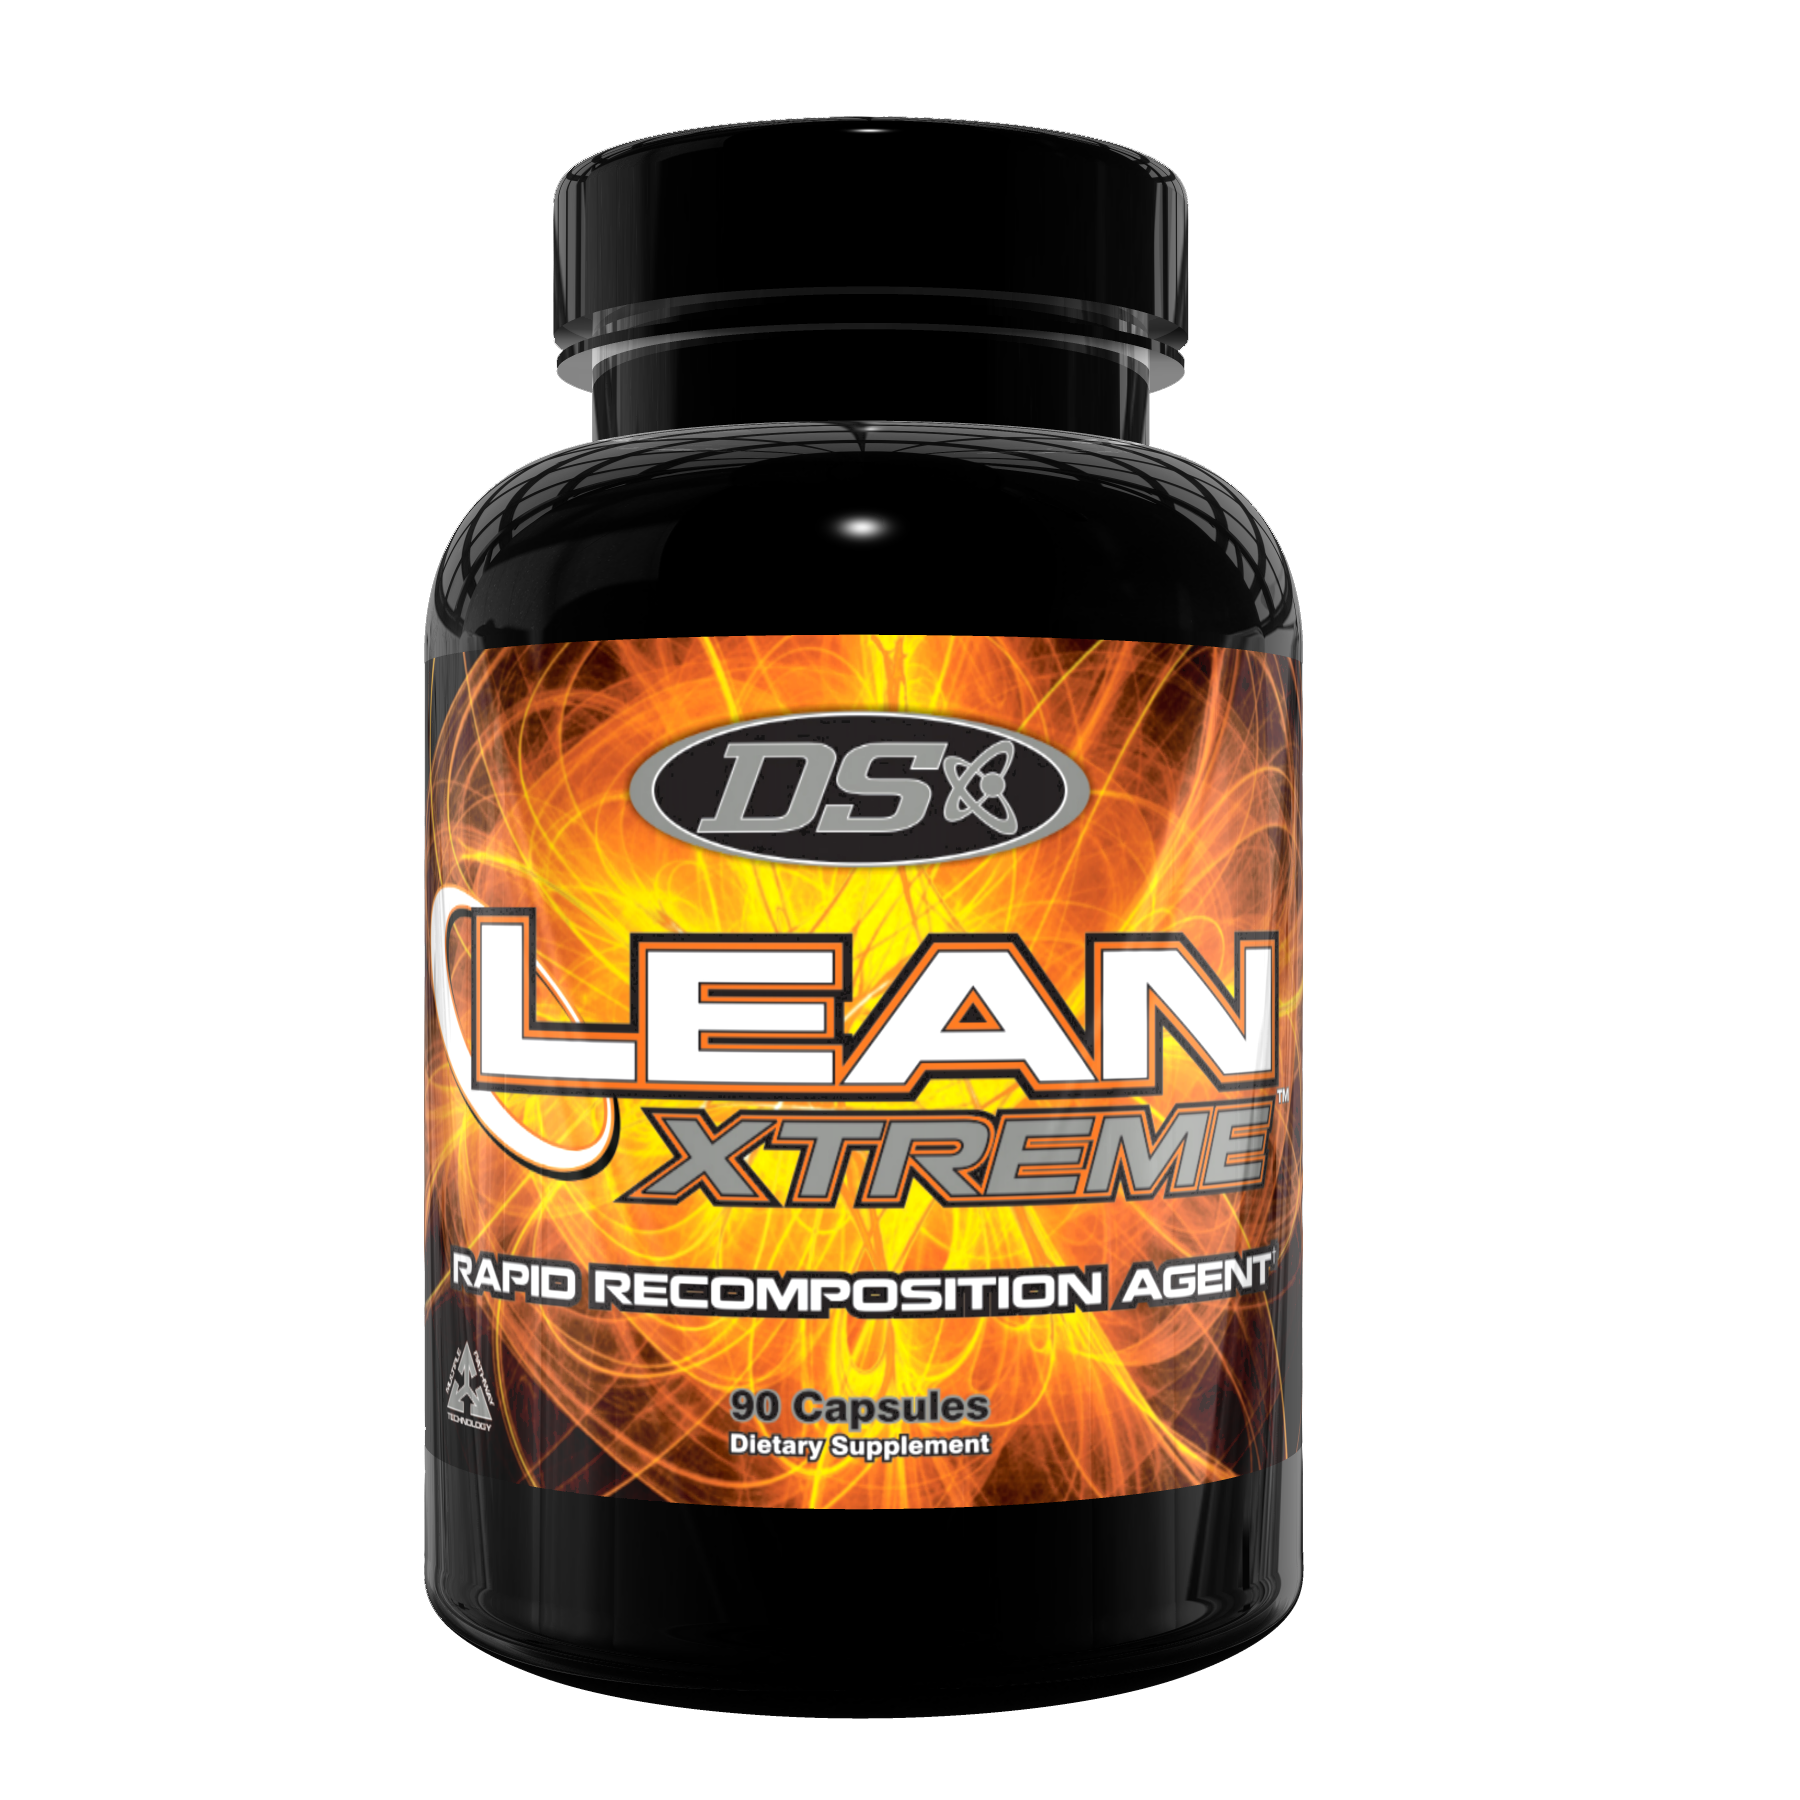 Lean Xtreme by Driven Sports - fat loss support